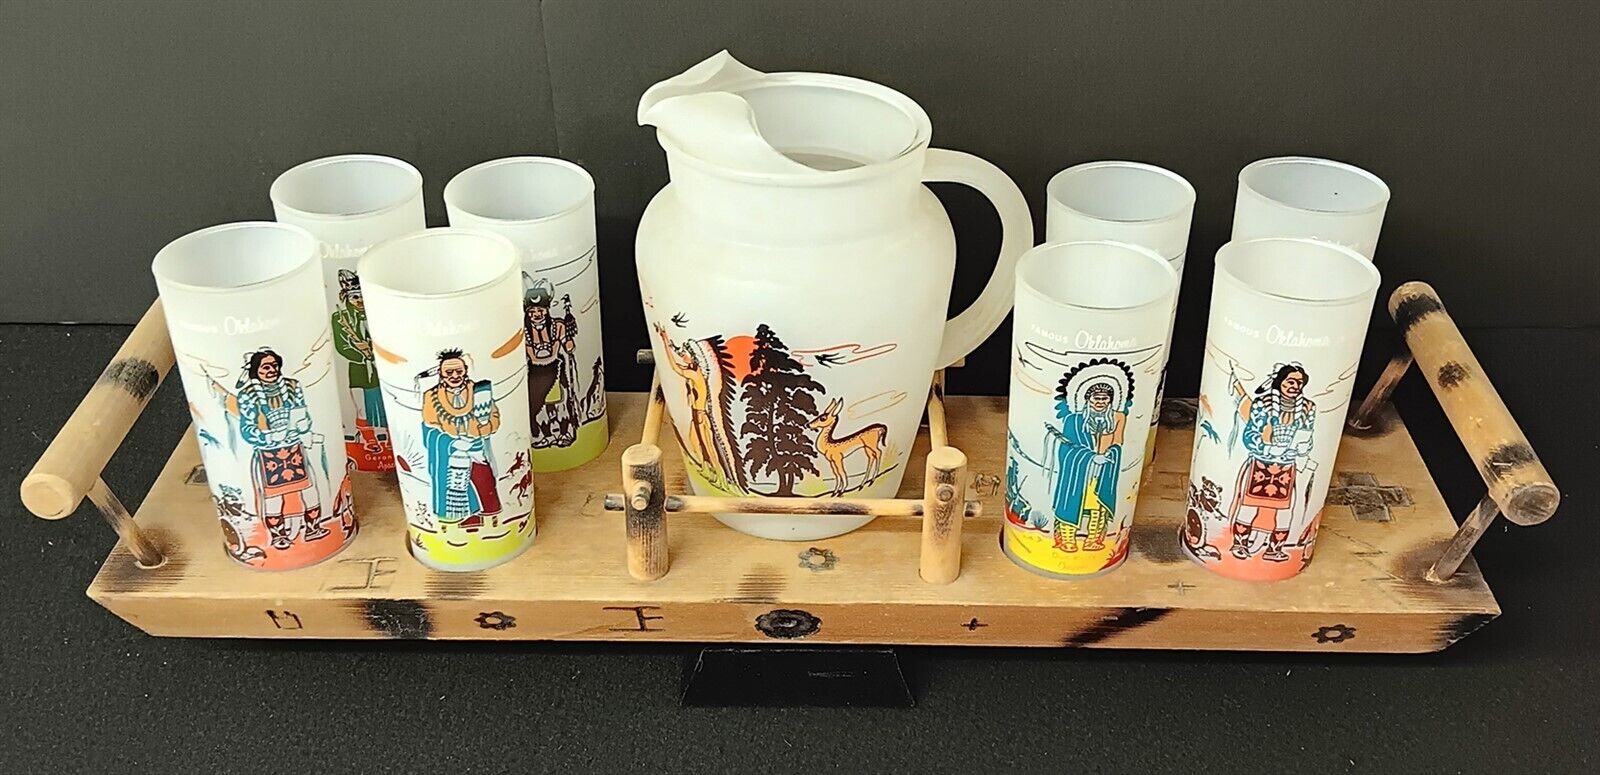 Oklahoma Indian Souvenir Knox Gas Acee Blue Eagle 8 Glasses,Tray,and Pitcher Set